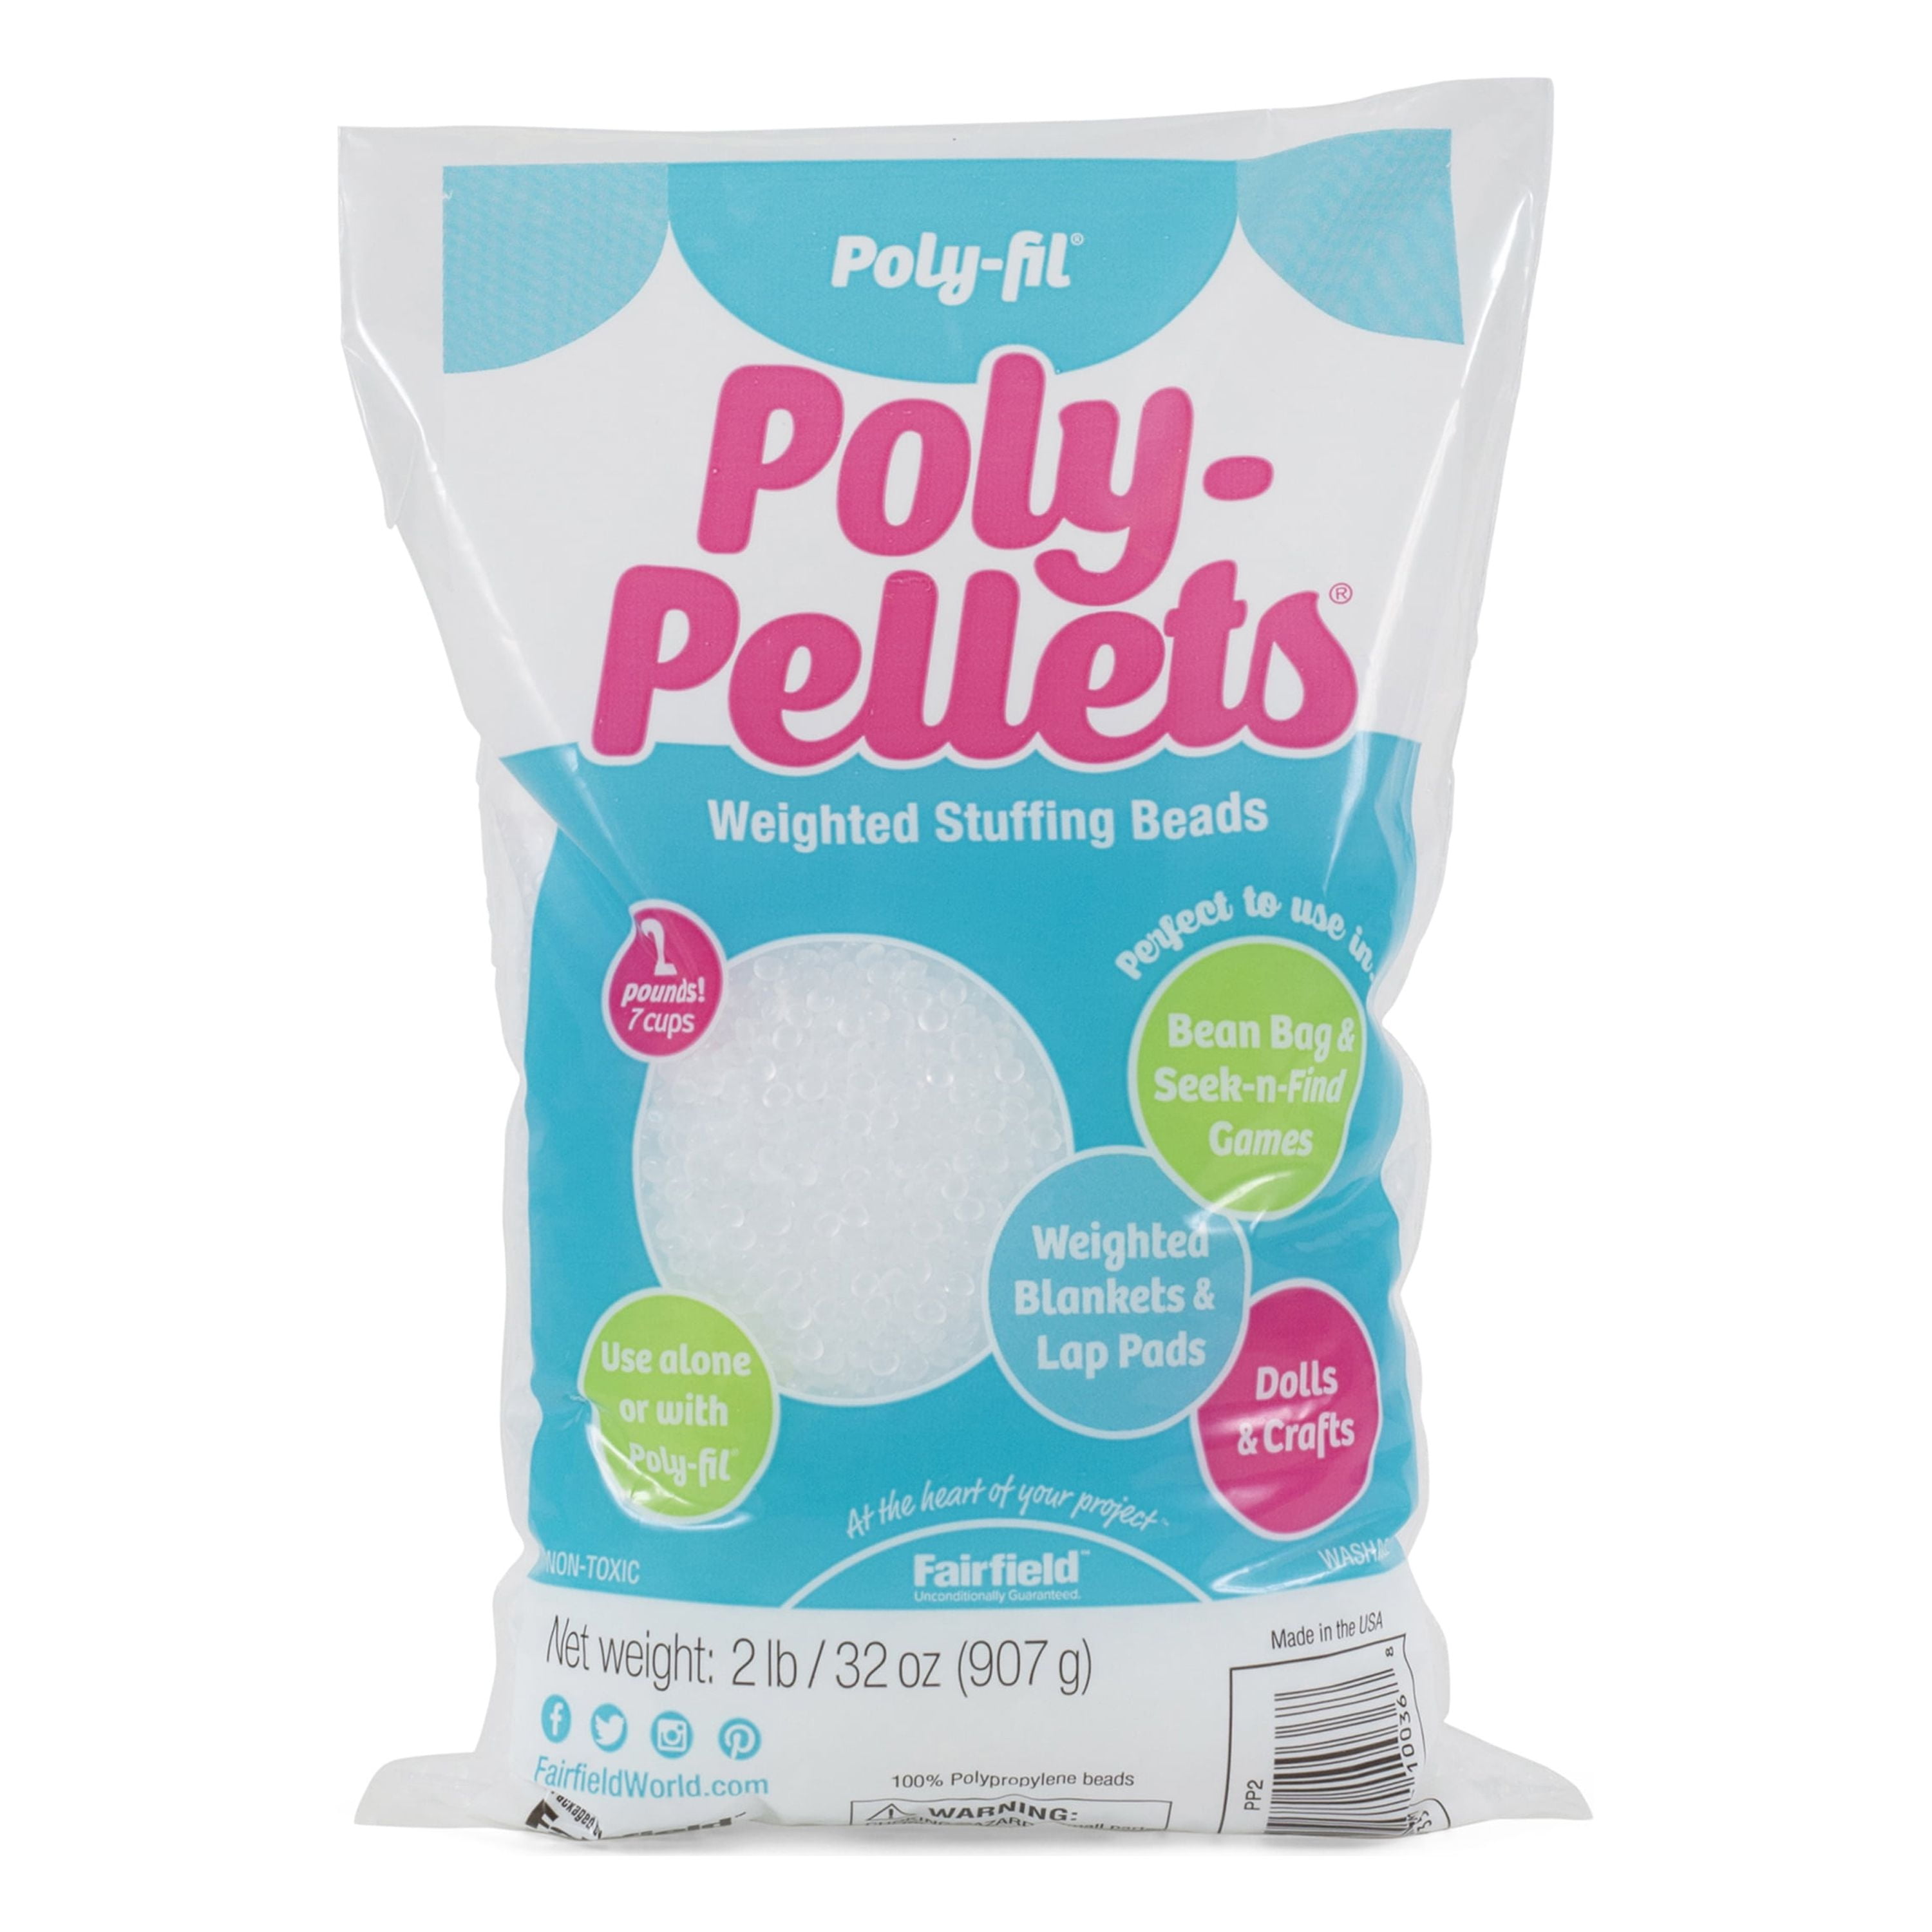 Poly Pellets Weighted Stuffing Beads 8 oz bags lot of 3 sealed new